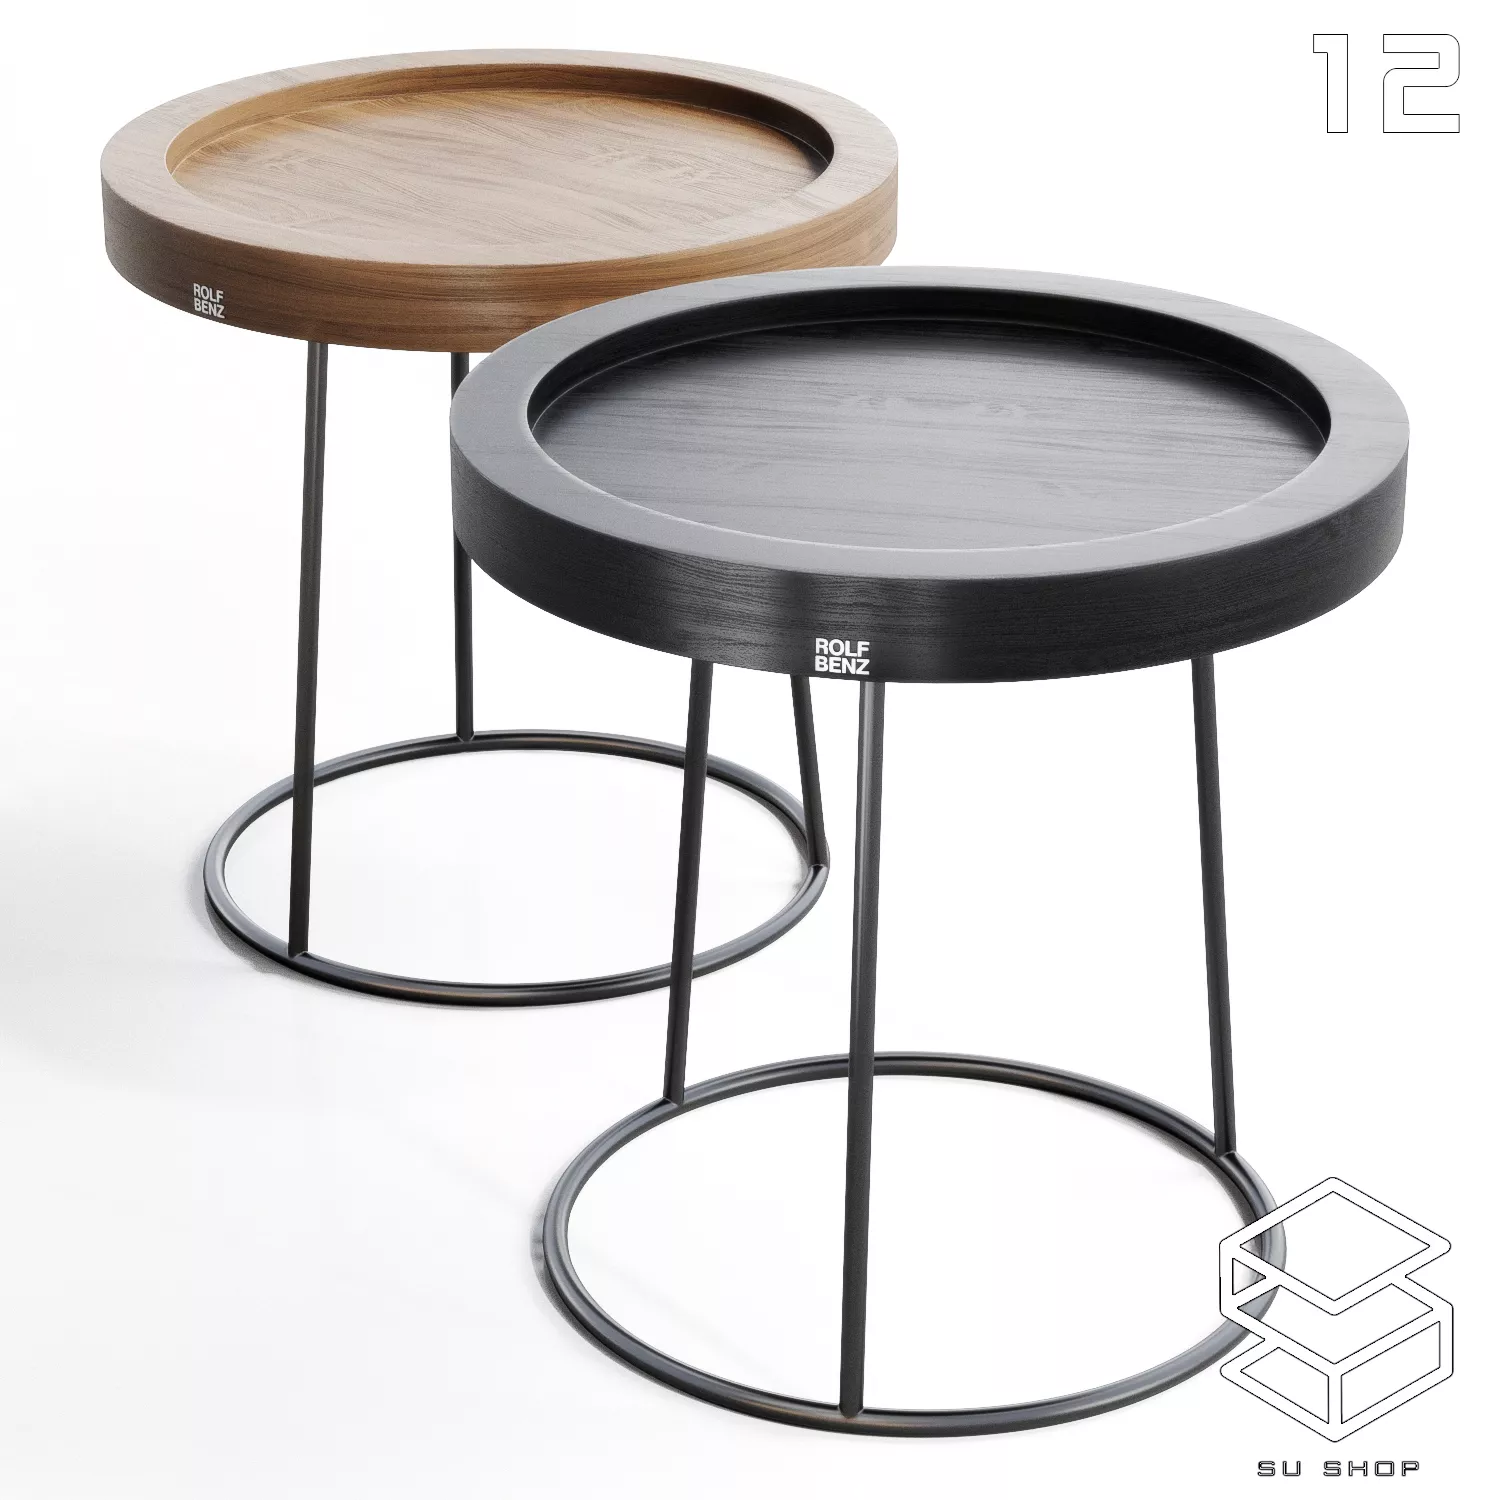 MODERN TEA TABLE - SKETCHUP 3D MODEL - VRAY OR ENSCAPE - ID15019